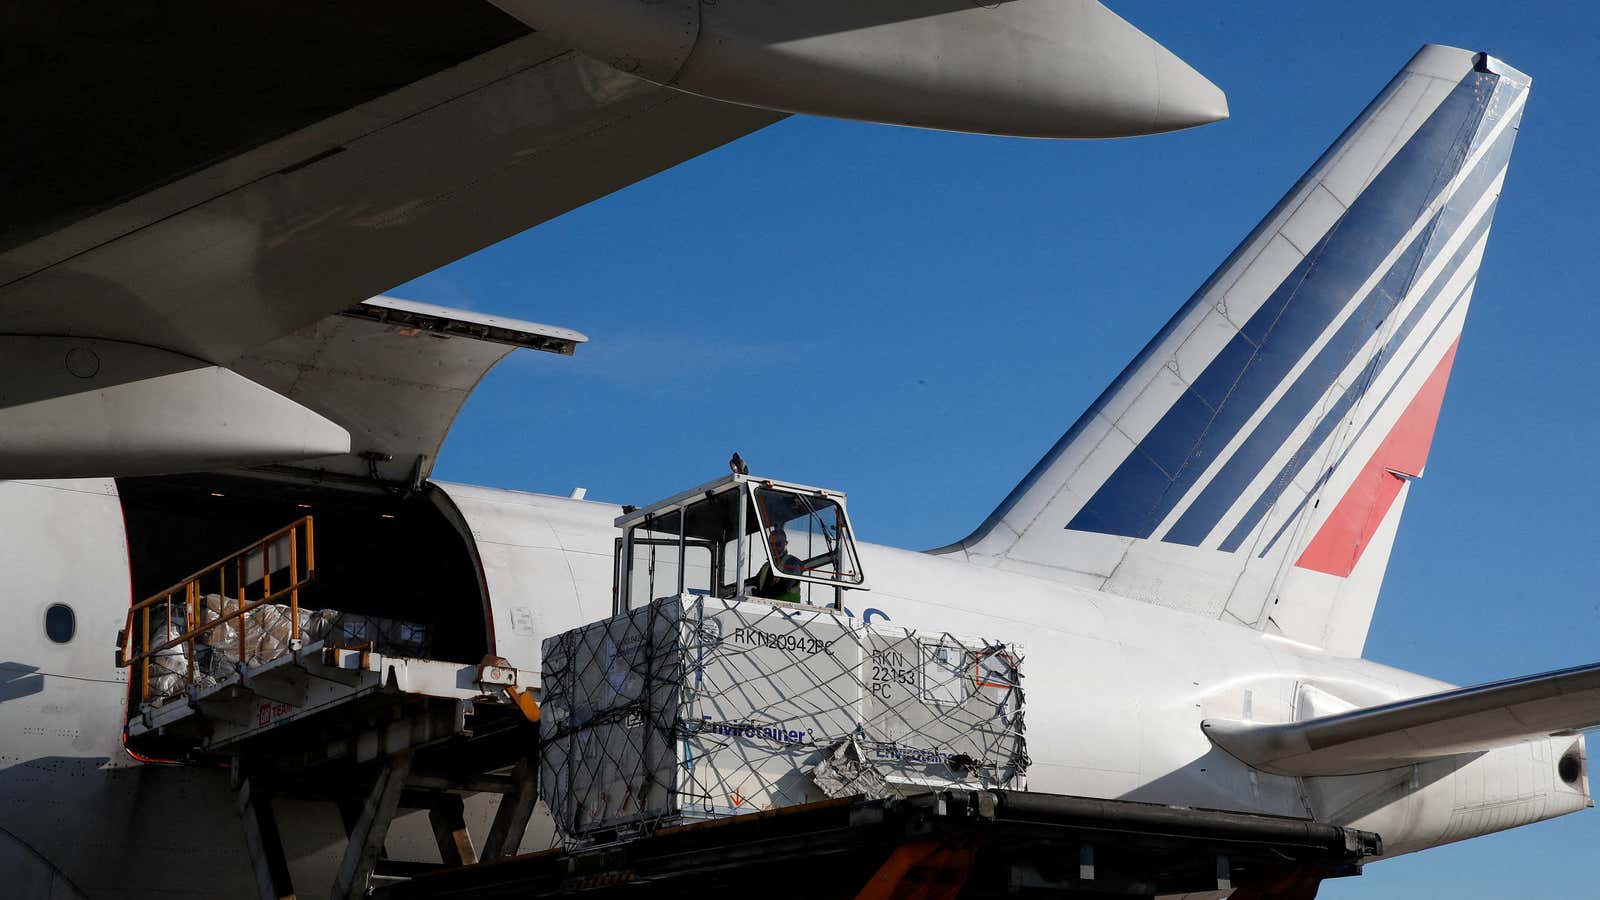 Air France employees load a Boeing 777 cargo plane at Charles de Gaulle airport.